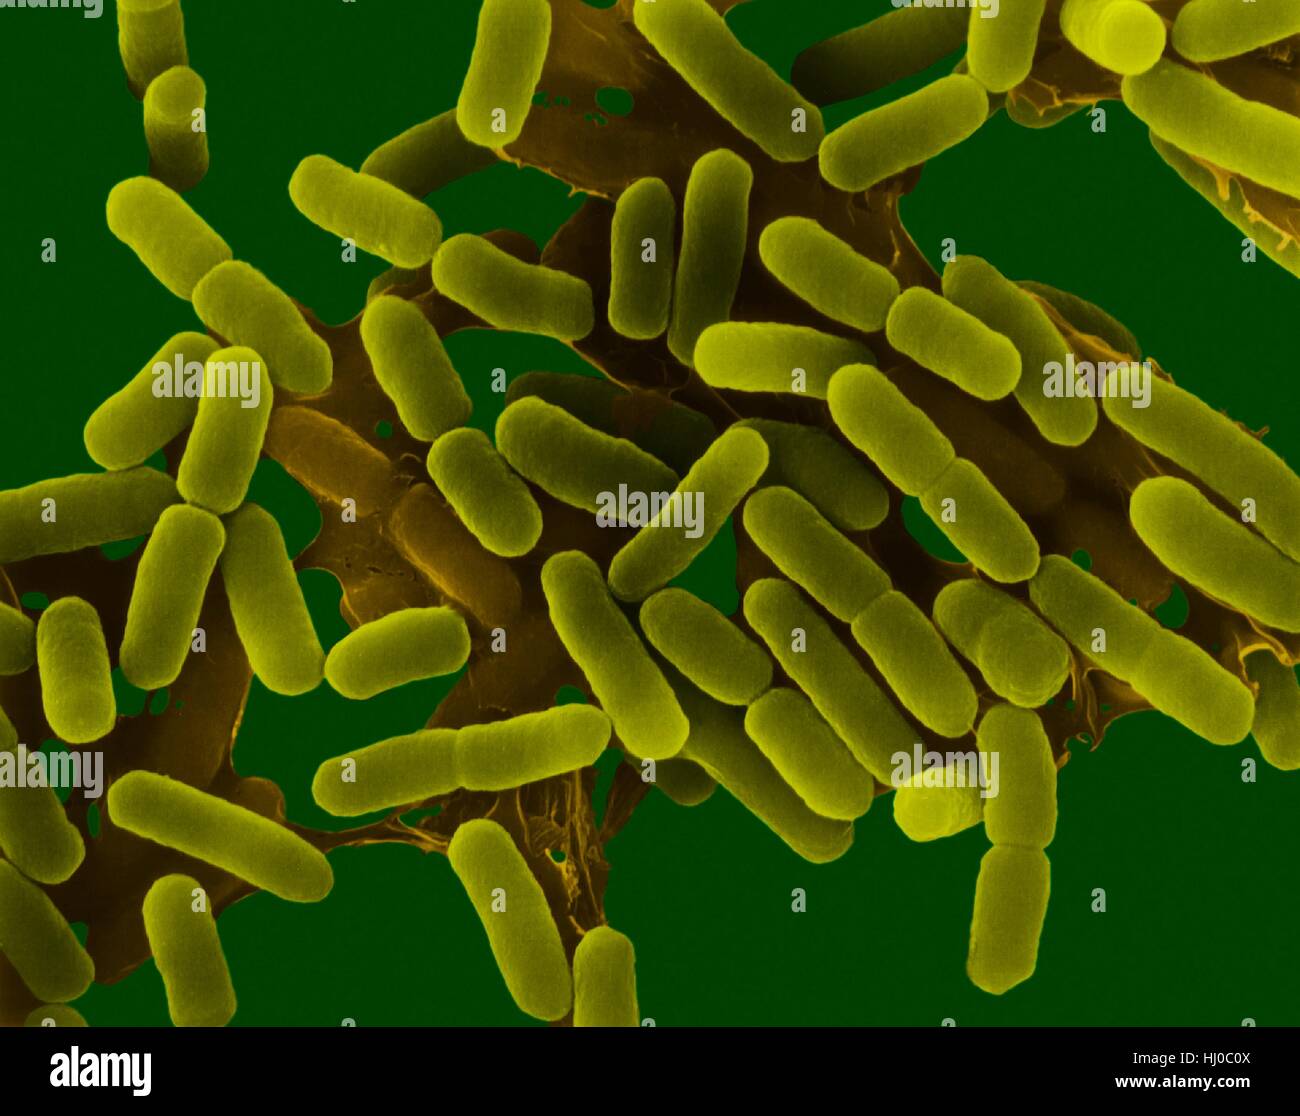 Coloured scanning electron micrograph (SEM) of Escherichia coli is a Gram-negative, facultatively anaerobic, enteric, rod prokaryote. This bacterium was isolated from the human intestine and is normally a part of the human and animal microbiota. Most E. coli strains are harmless, but some strains can cause serious problems such as: food poisoning, urinary tract infections, traveller's diarrhoea and nosocomial infections. The E. coli 0157:H7 strain is fatal to humans if contracted when contaminated meat is cooked inadequately. Magnification: x2, 225 when shortest axis printed at 25 millimetres. Stock Photo